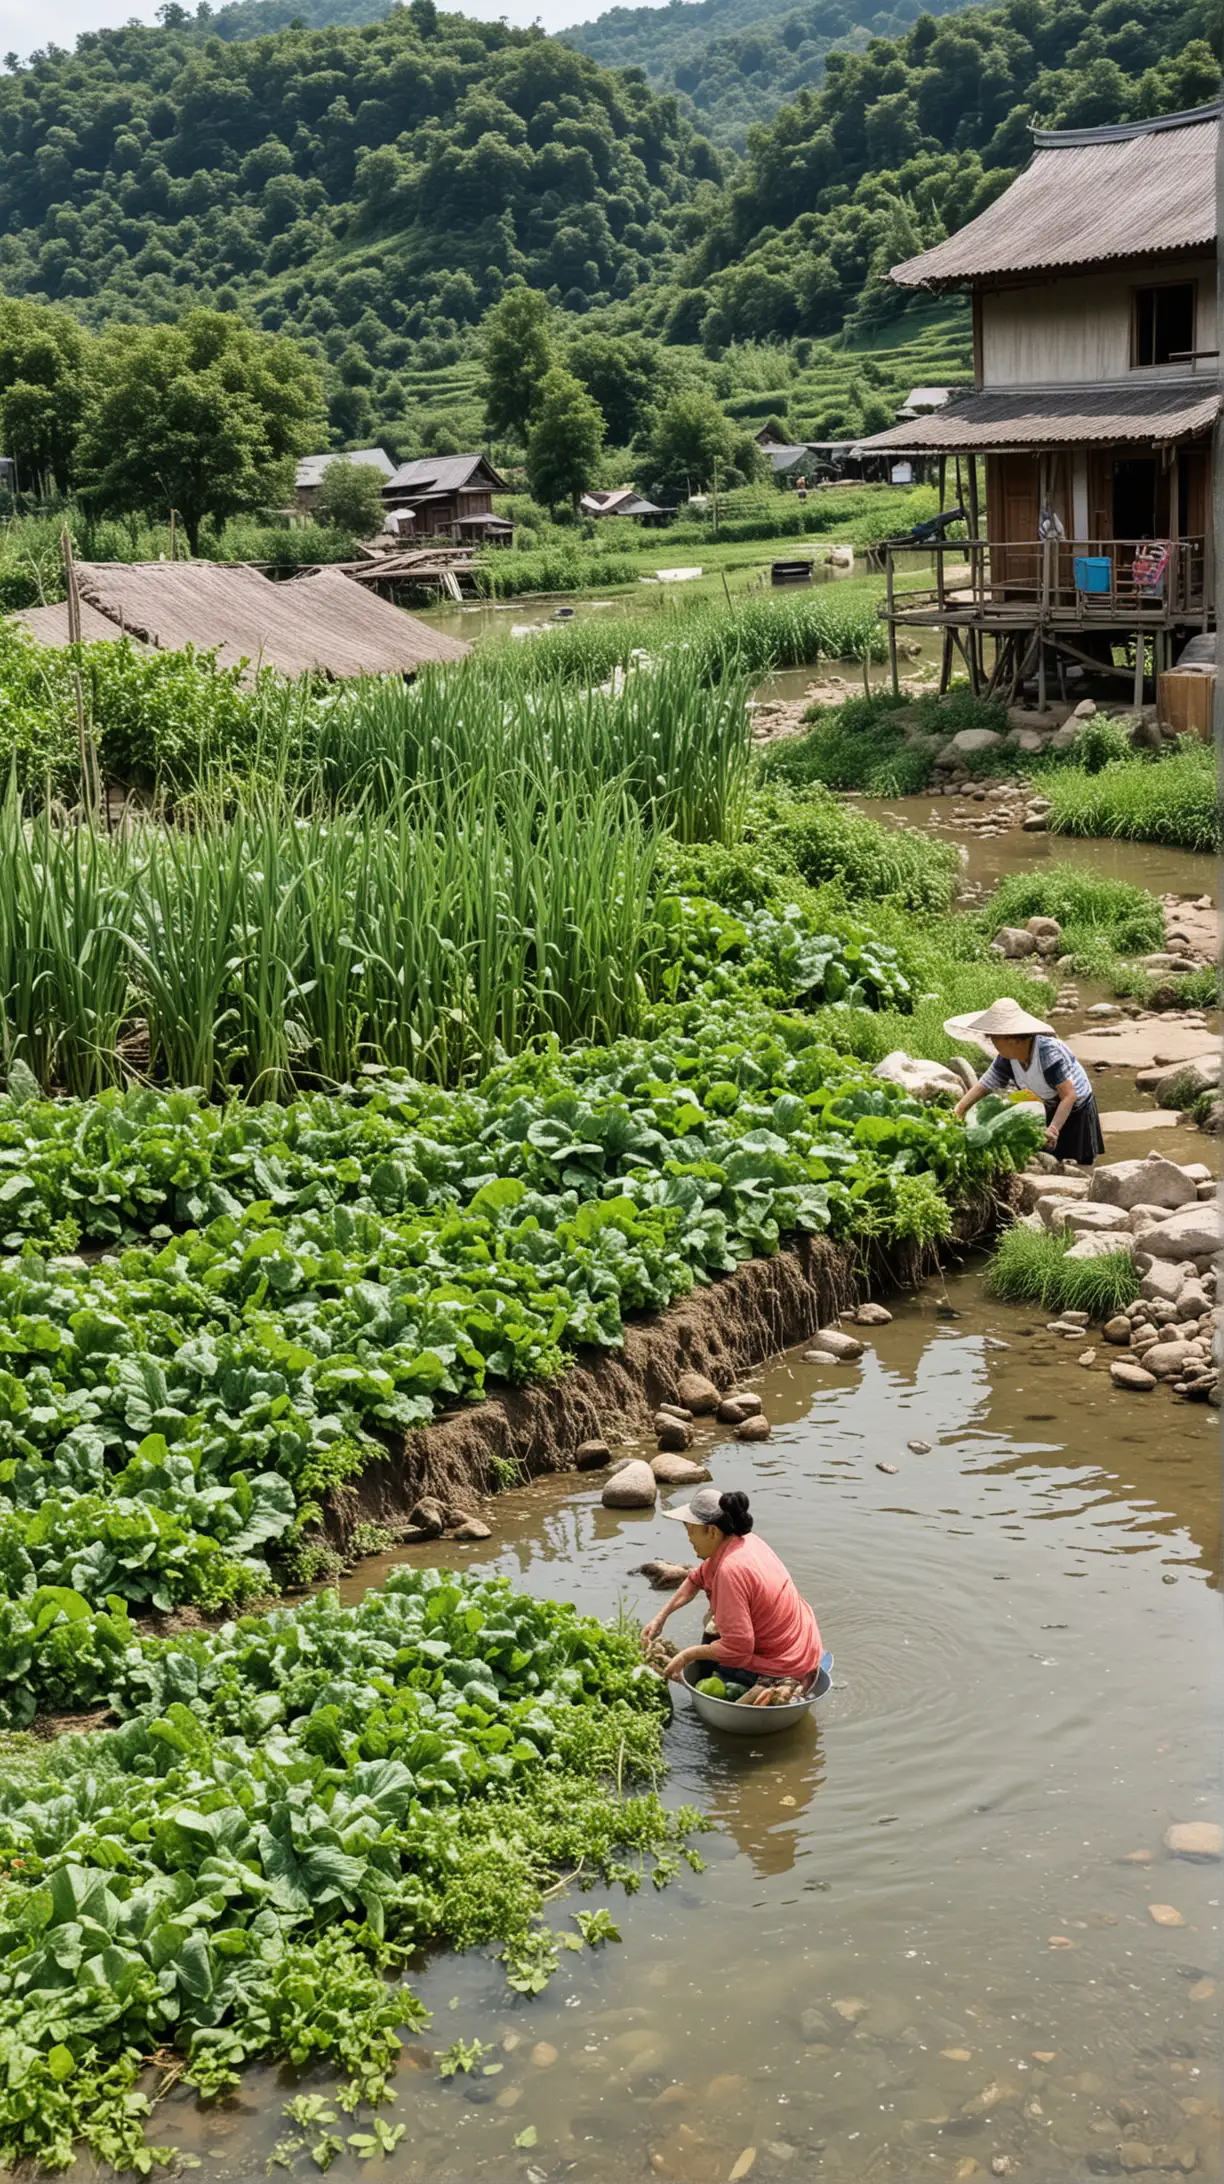 Elderly Asian Woman Washing Vegetables by River in Summer Setting